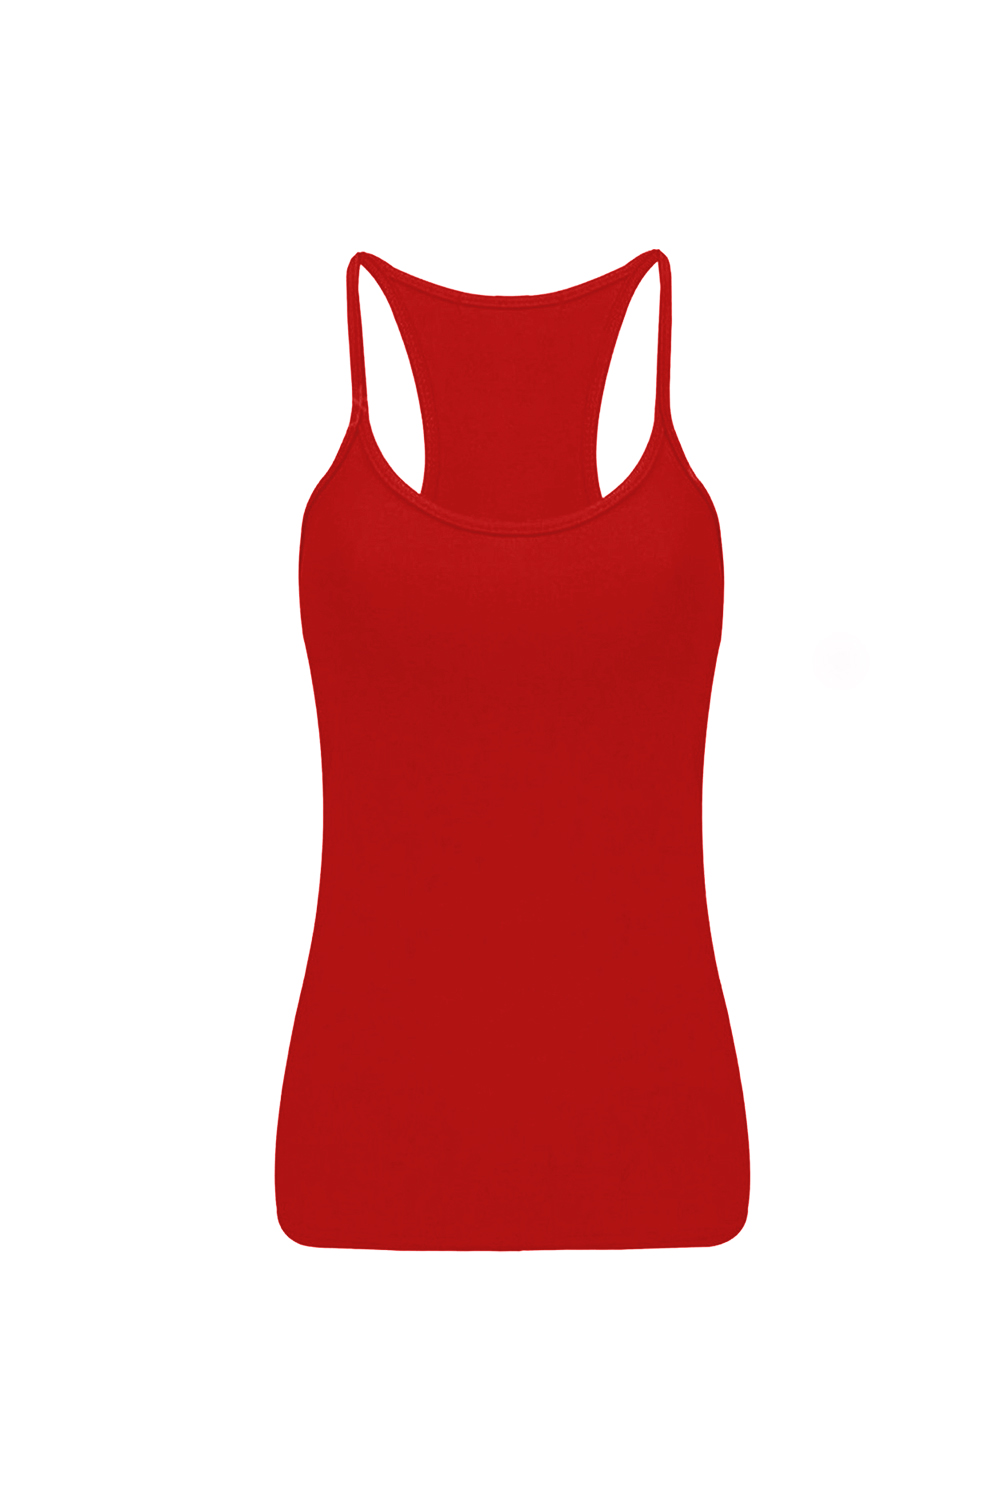 Crazy Chick Girls Microfibre Red Vest Top